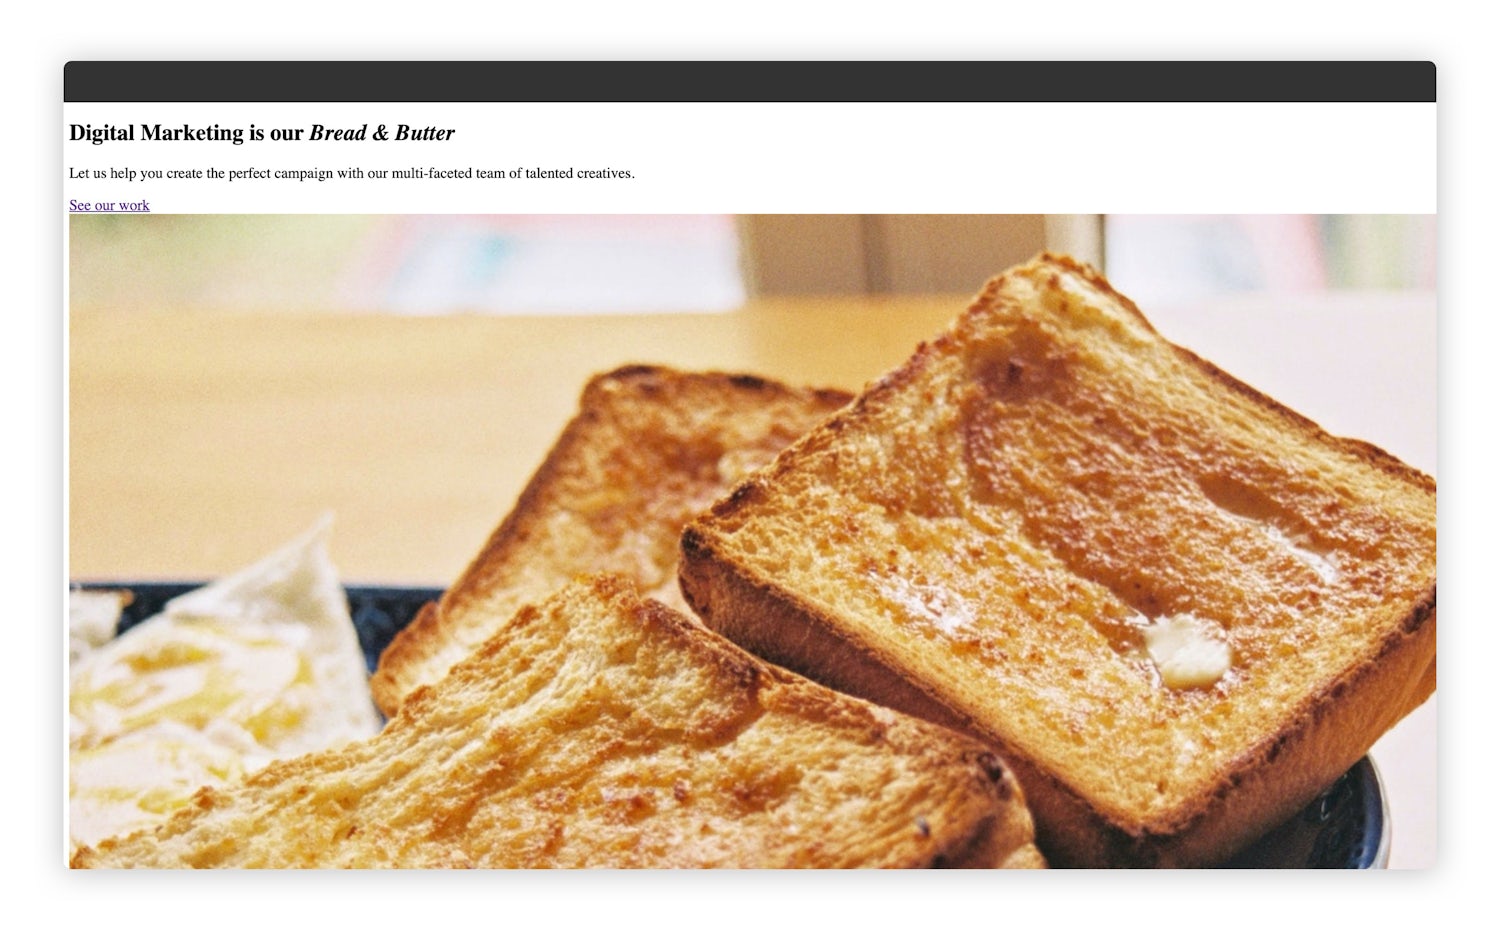 The same homepage with an image of toast that’s now successfully loaded